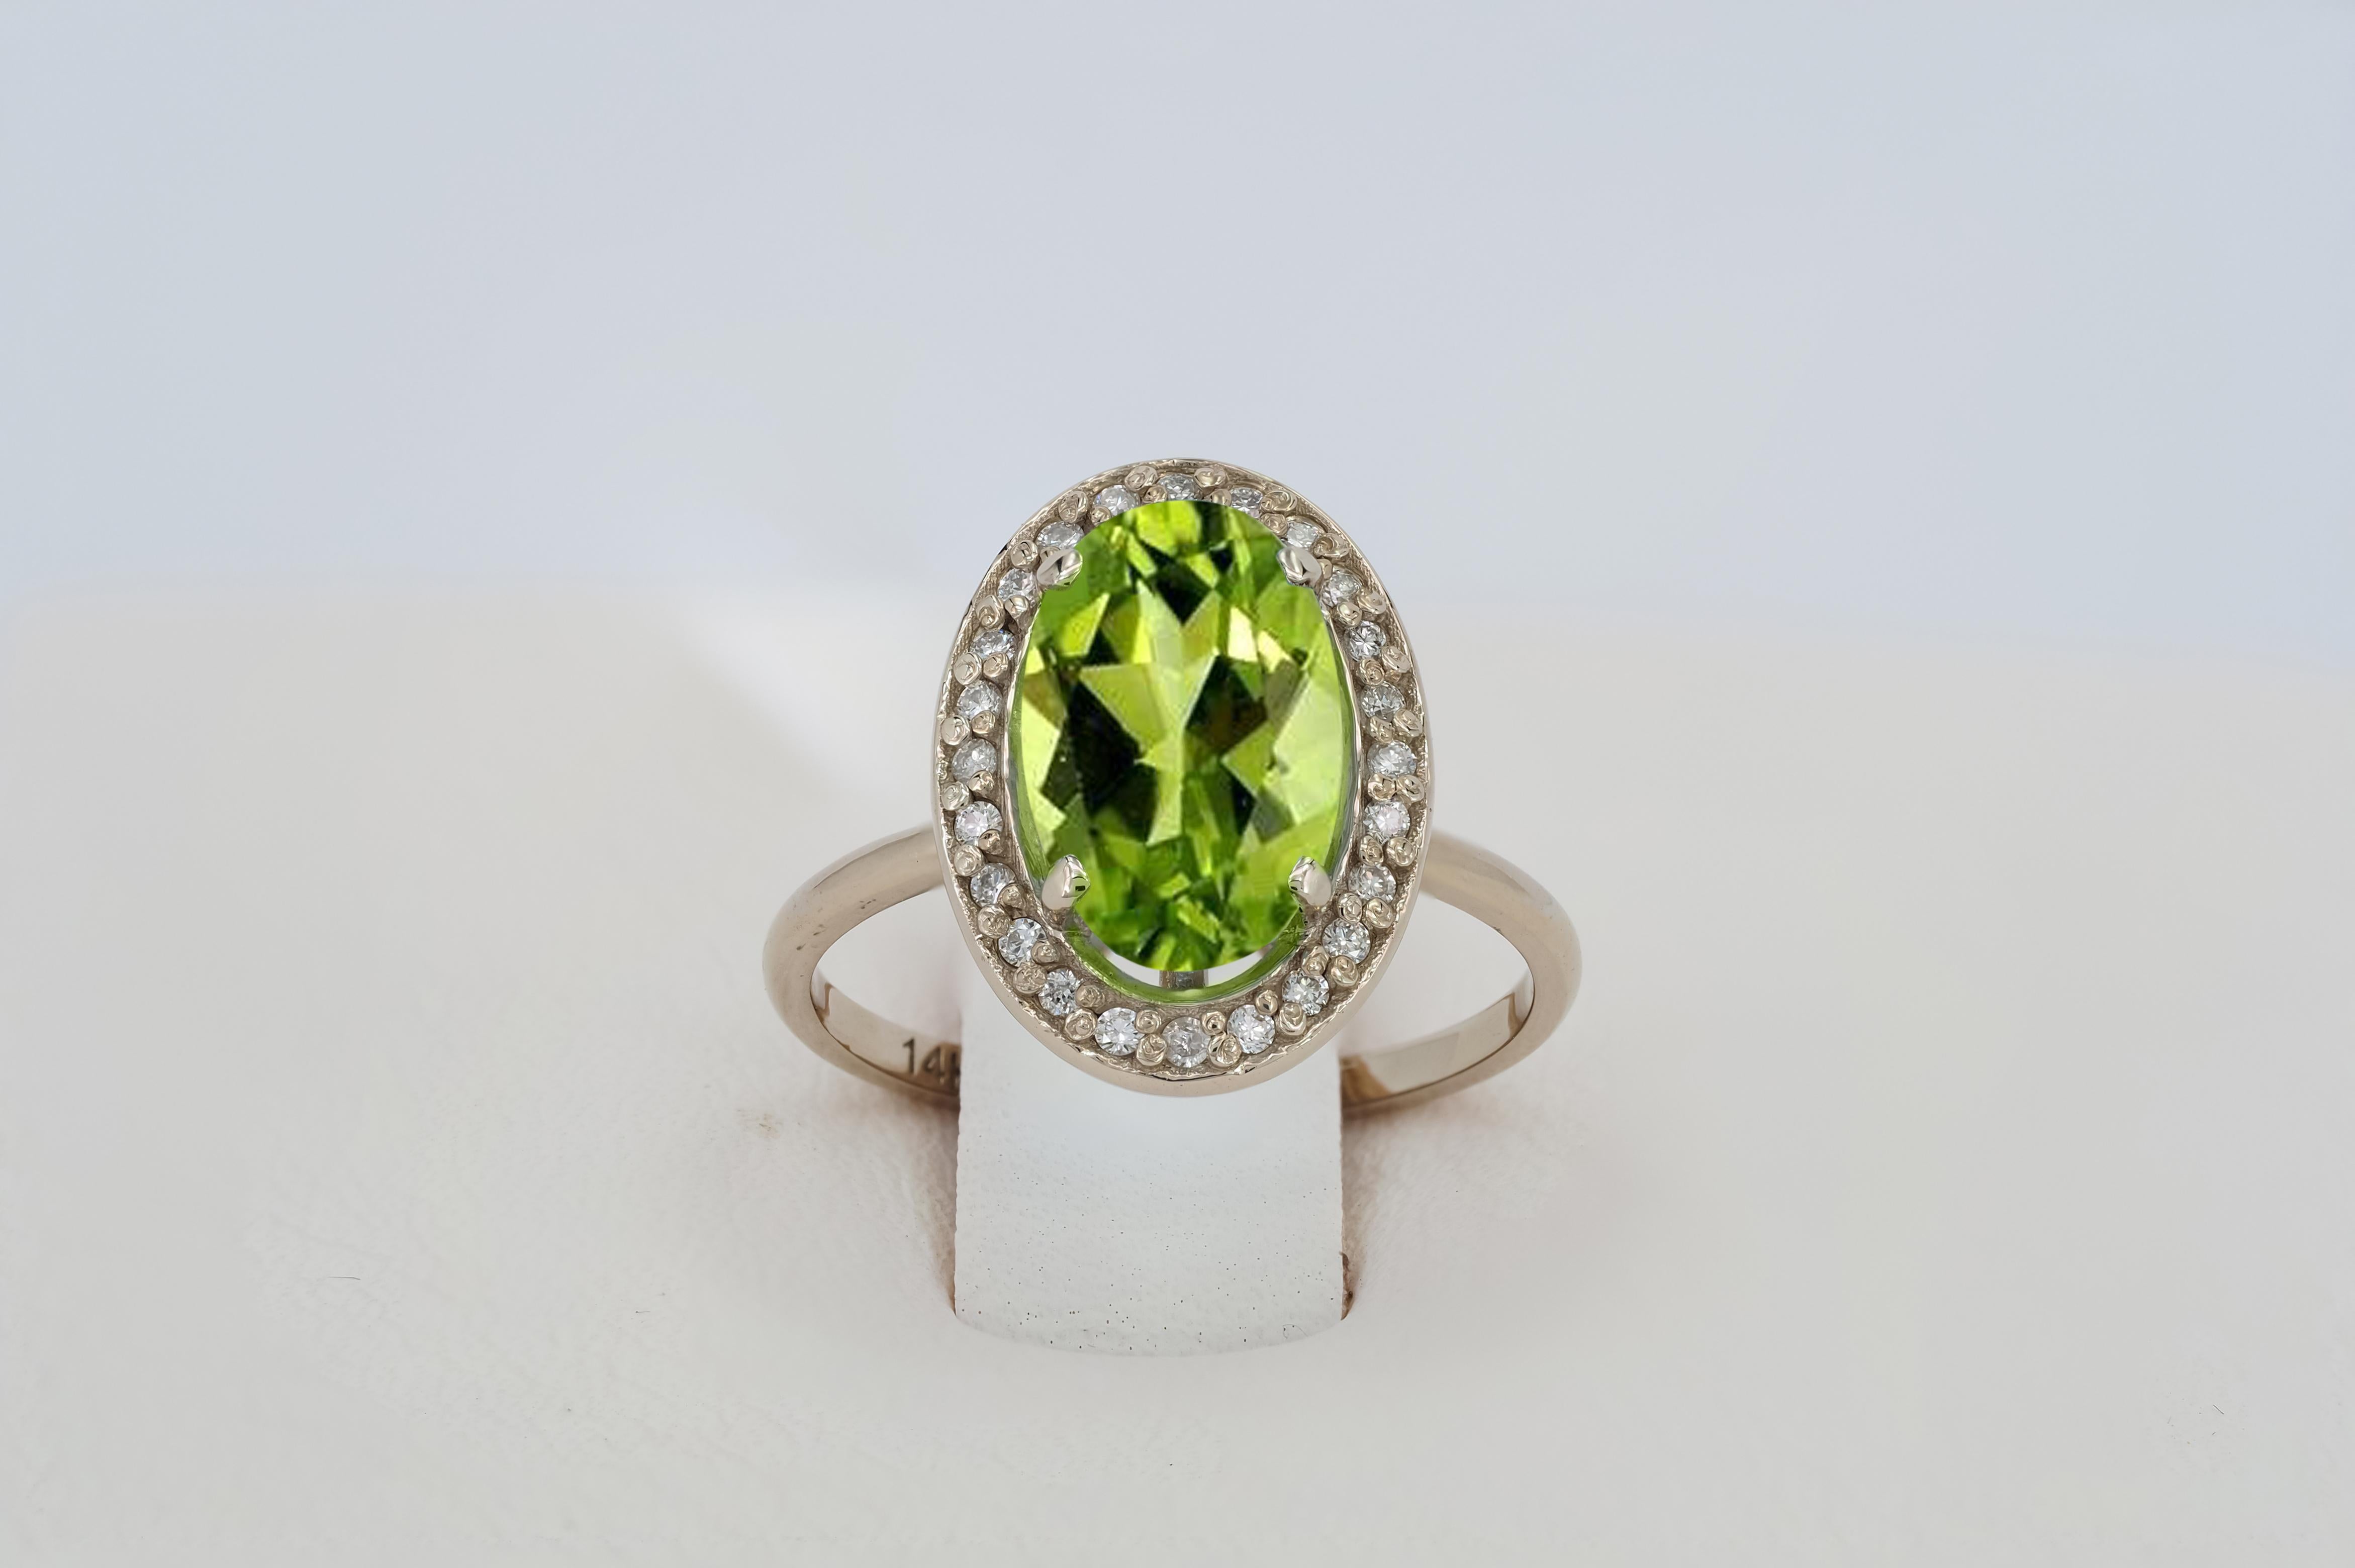 For Sale:  Peridot and diamonds 14k gold ring. 6